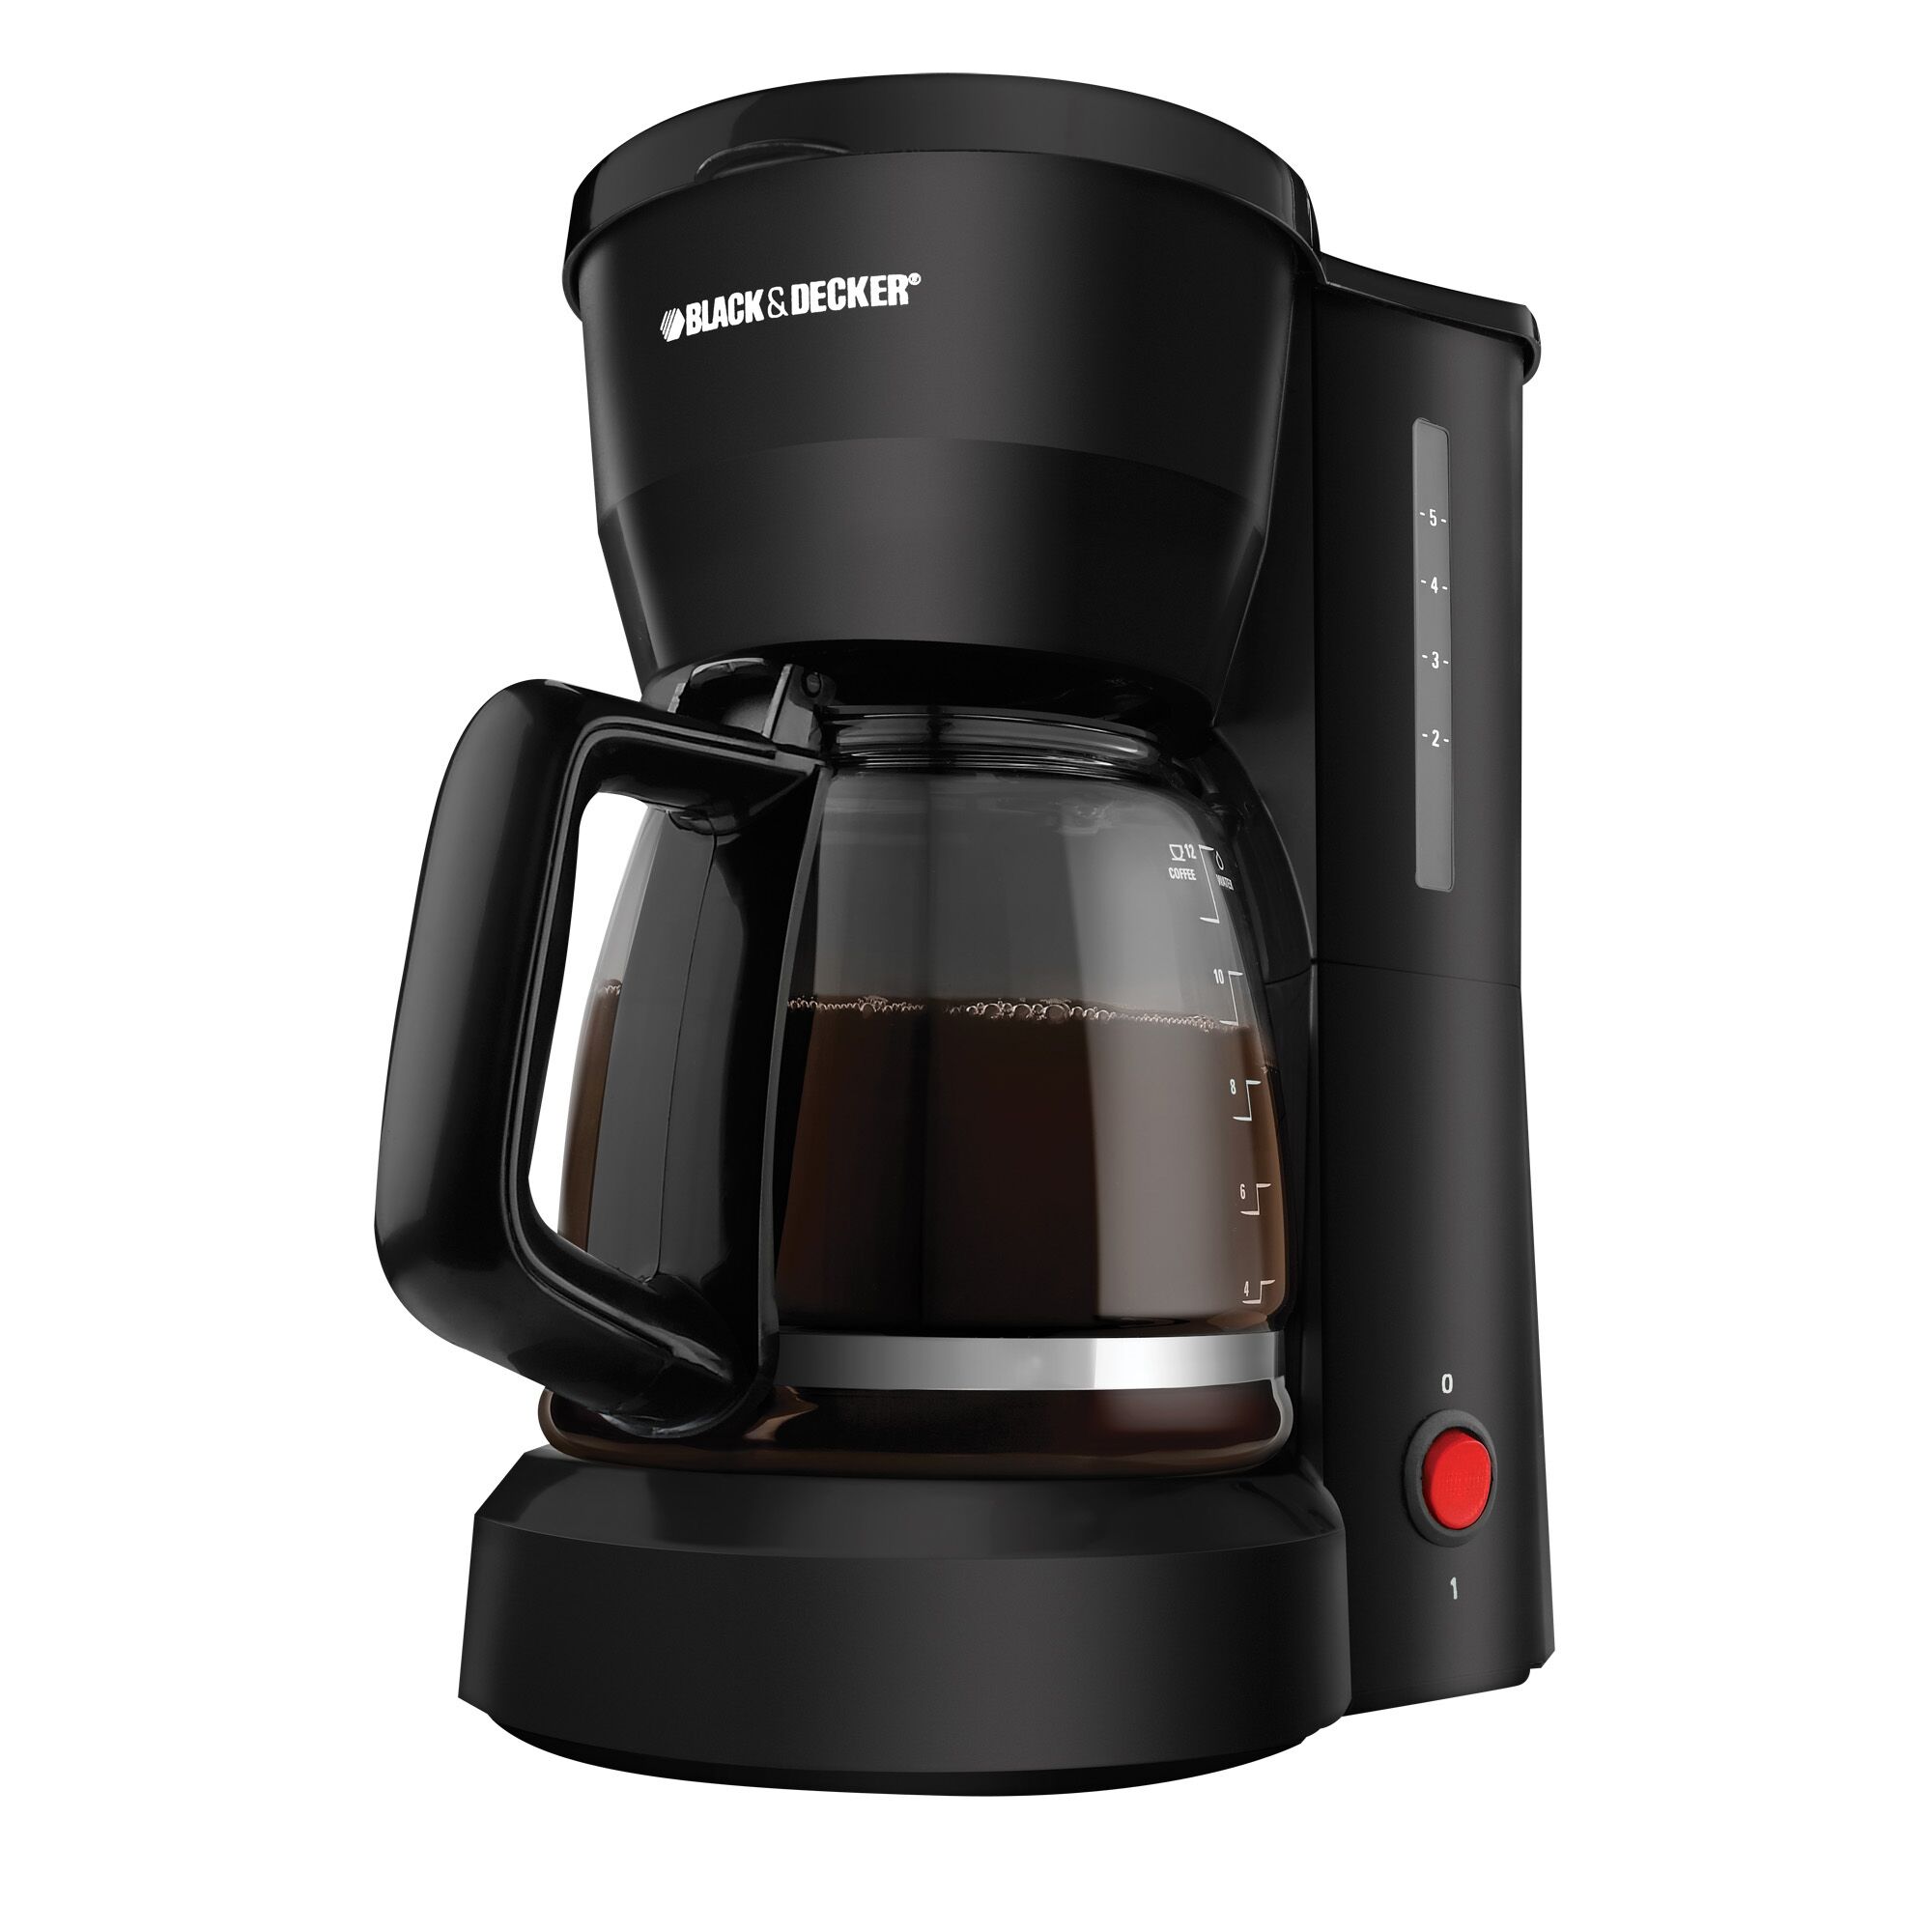 Profile photo of BLACK+DECKER coffee maker showing warmth indicator